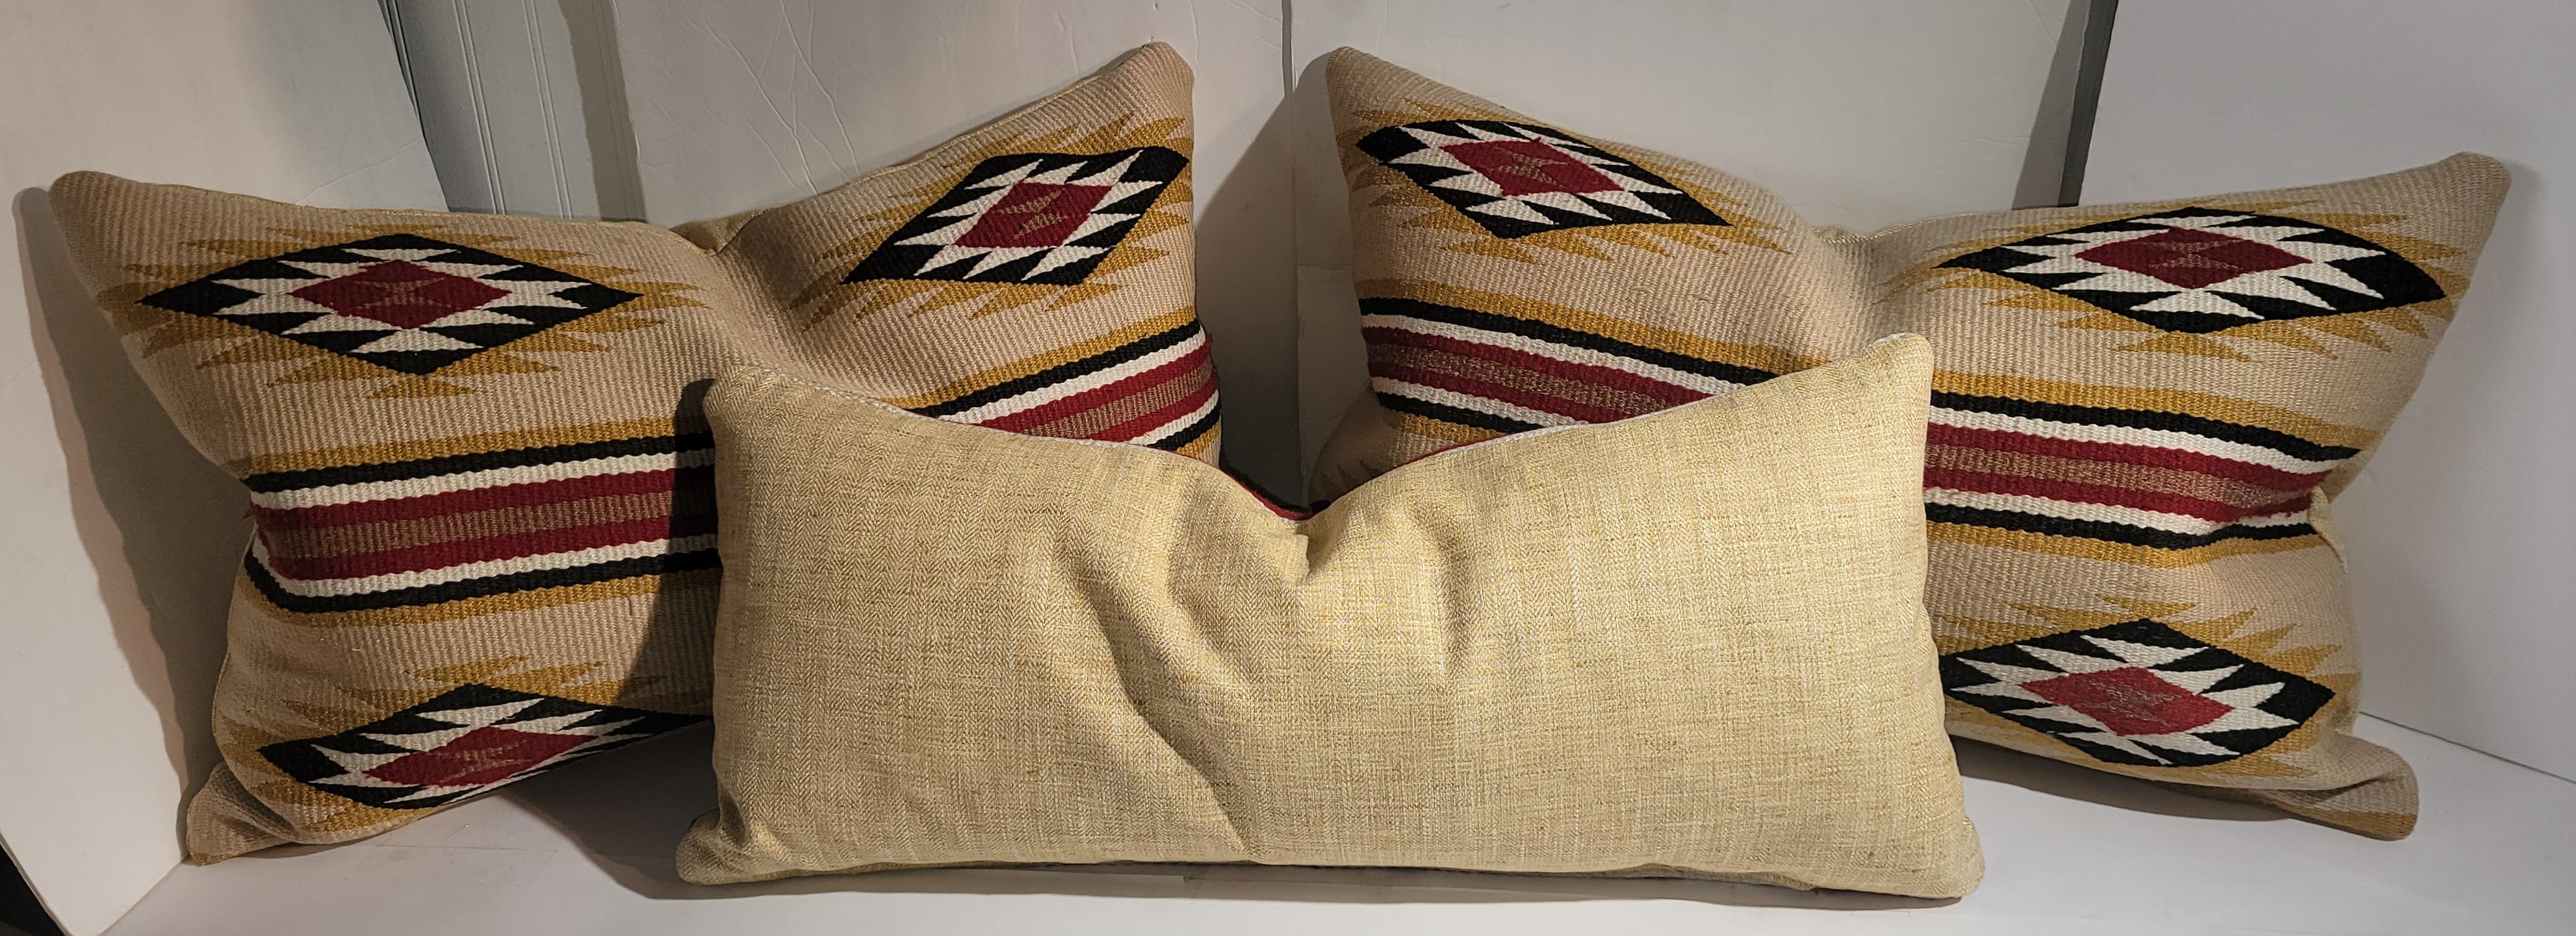 These Navajo Indian weaving pillows are Chinlies and all have yellow linen backings.The inserts are down & feather fill. All in fine condition. Sold as a group of three pillows.

largest pillows measure 27x 16.5 each 
smaller pillow measures 27 x 11